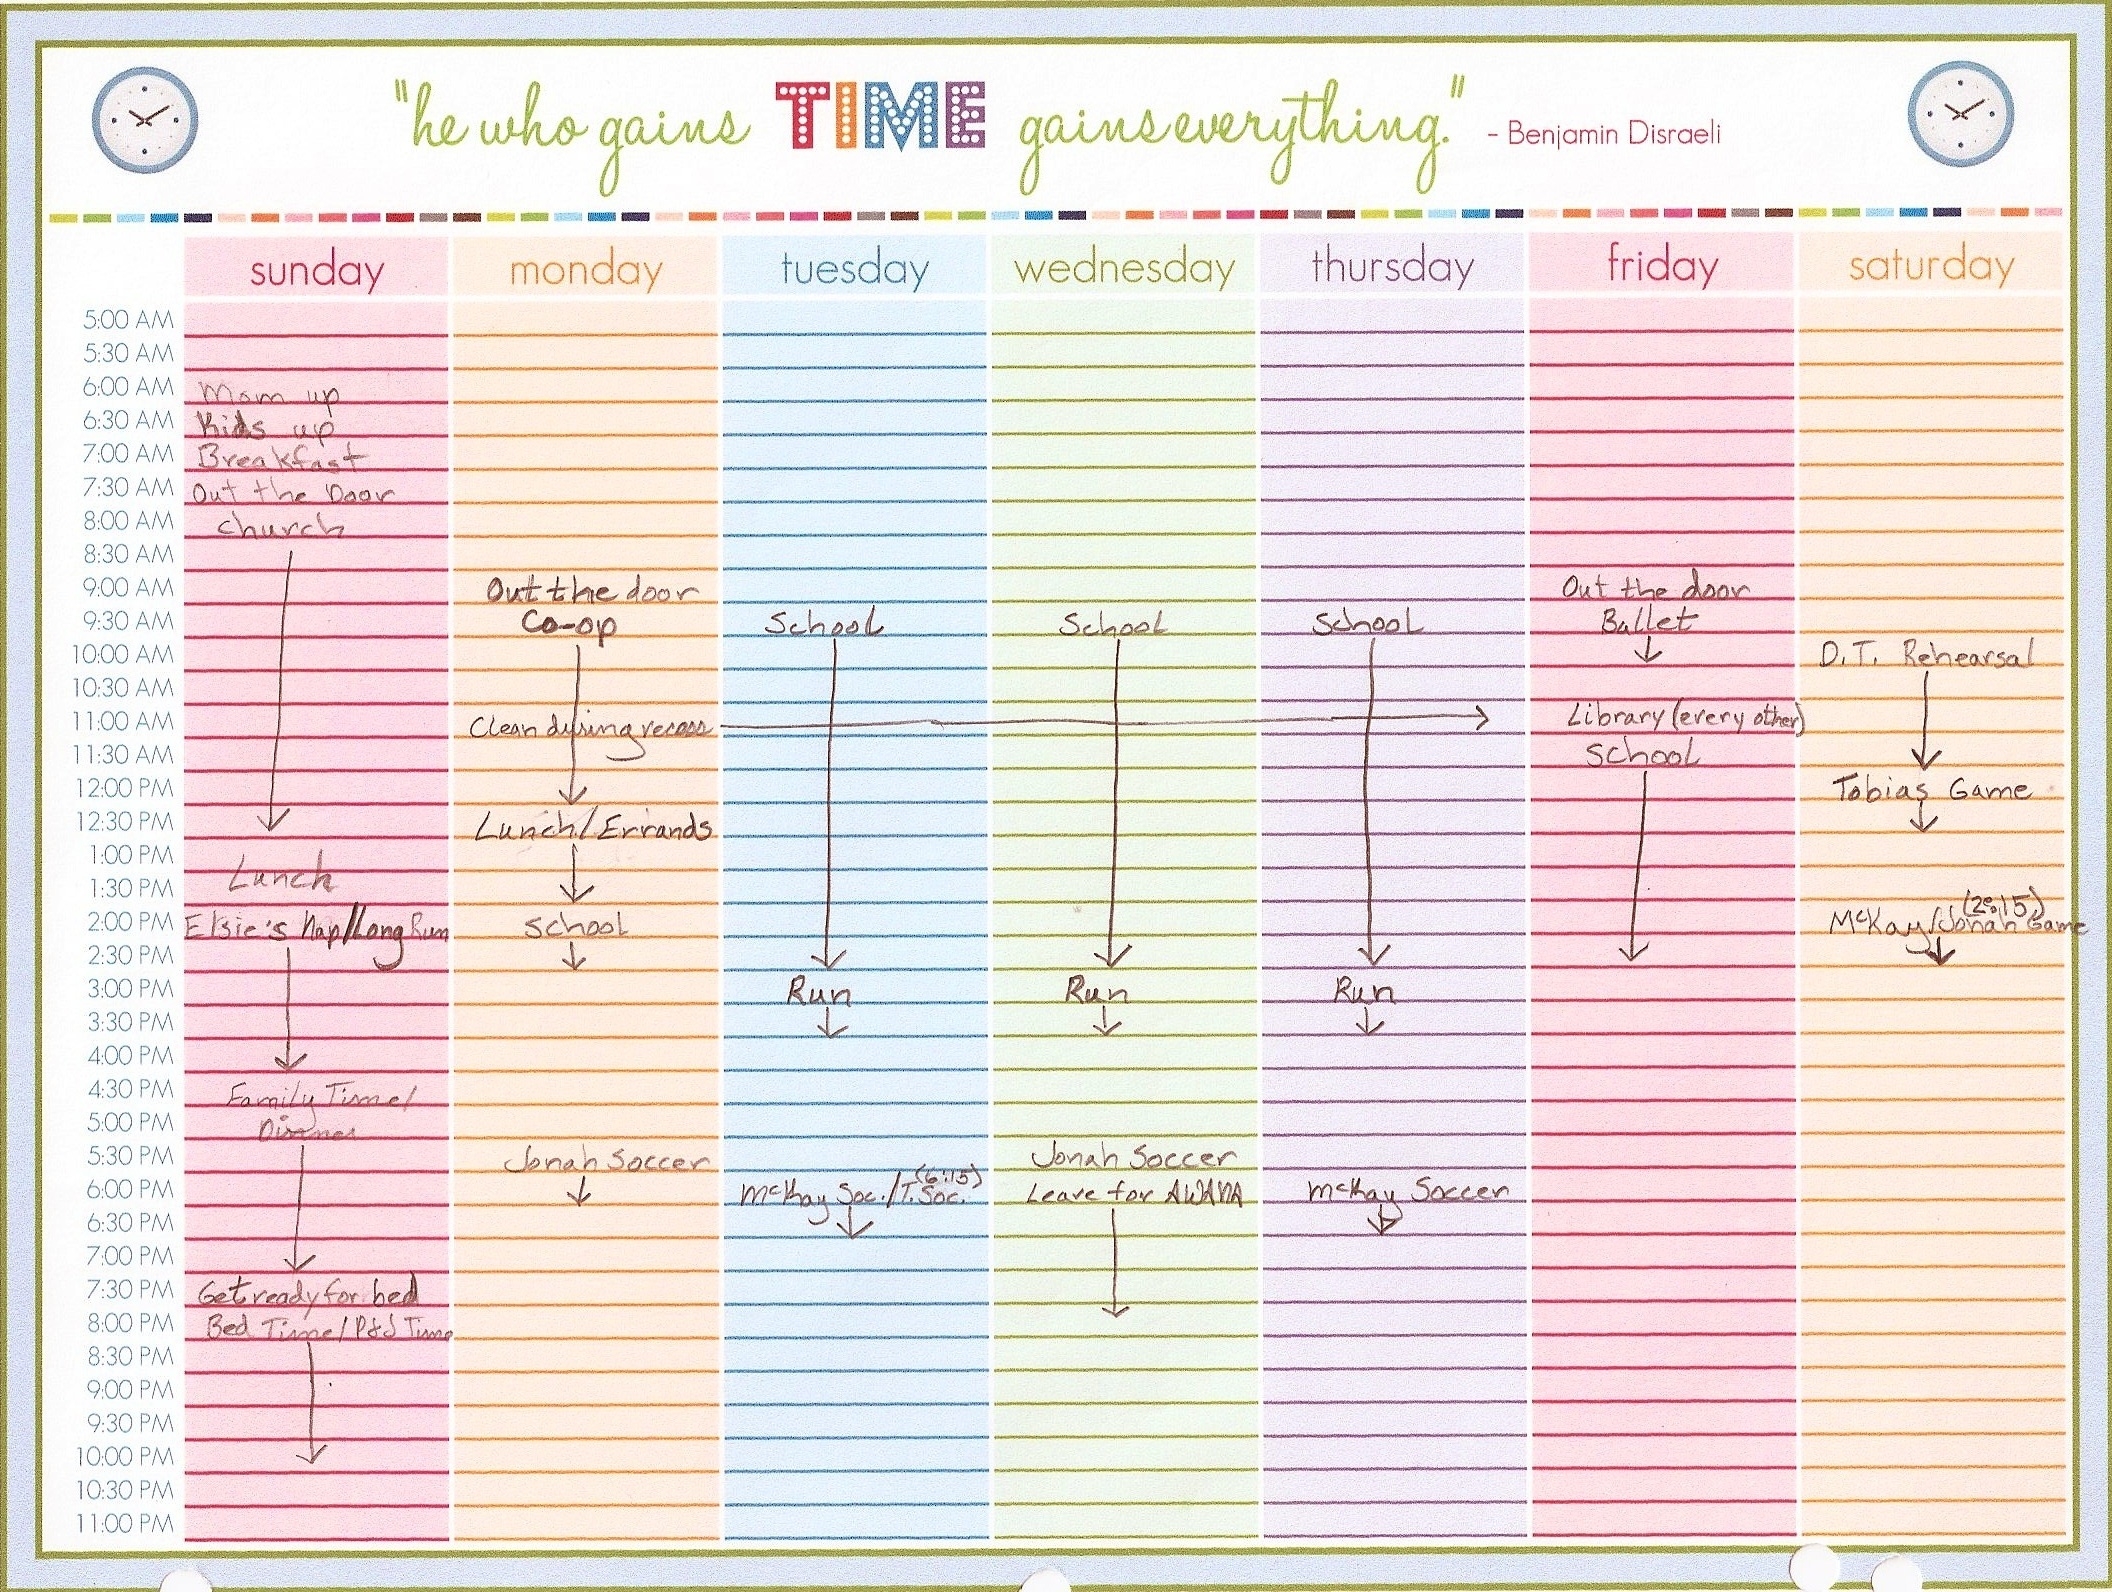 Free Weekly Schedule Template | Trattorialeondoro  Free Printable Daily Calendar With Time Slots